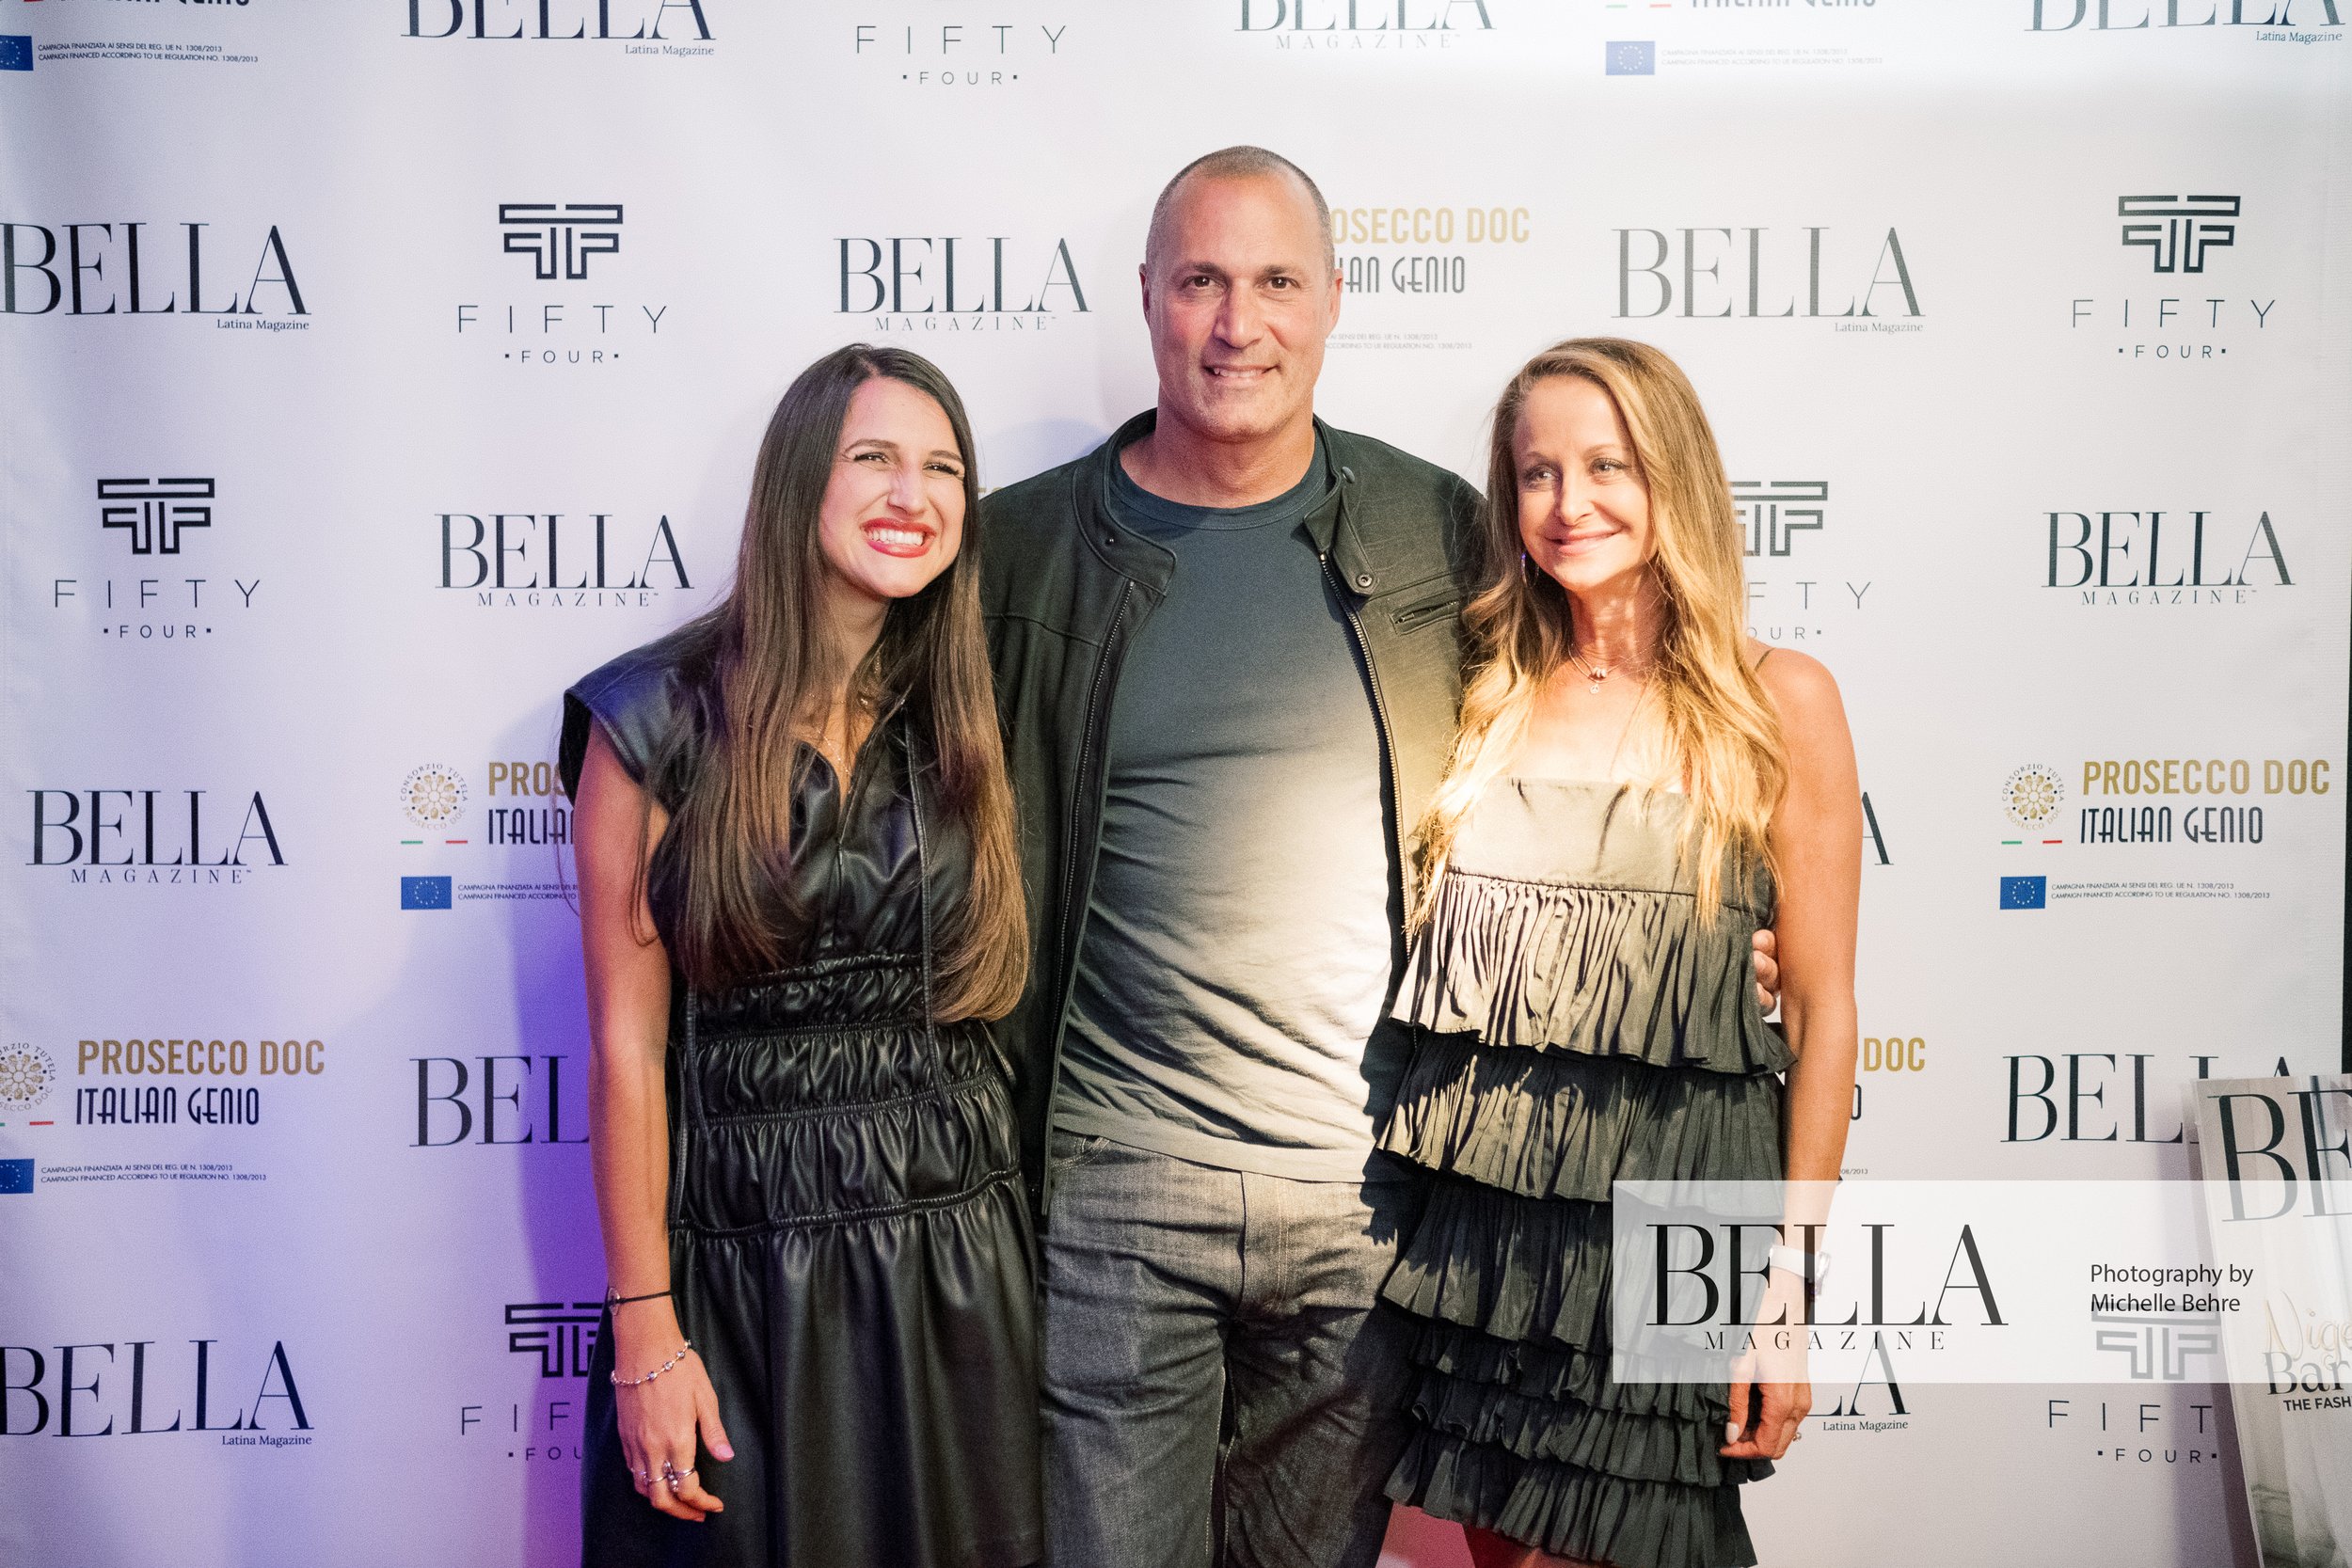 BELLA-Magazine-September-Issue-Cover-Event-Fifty-Four-230.jpg